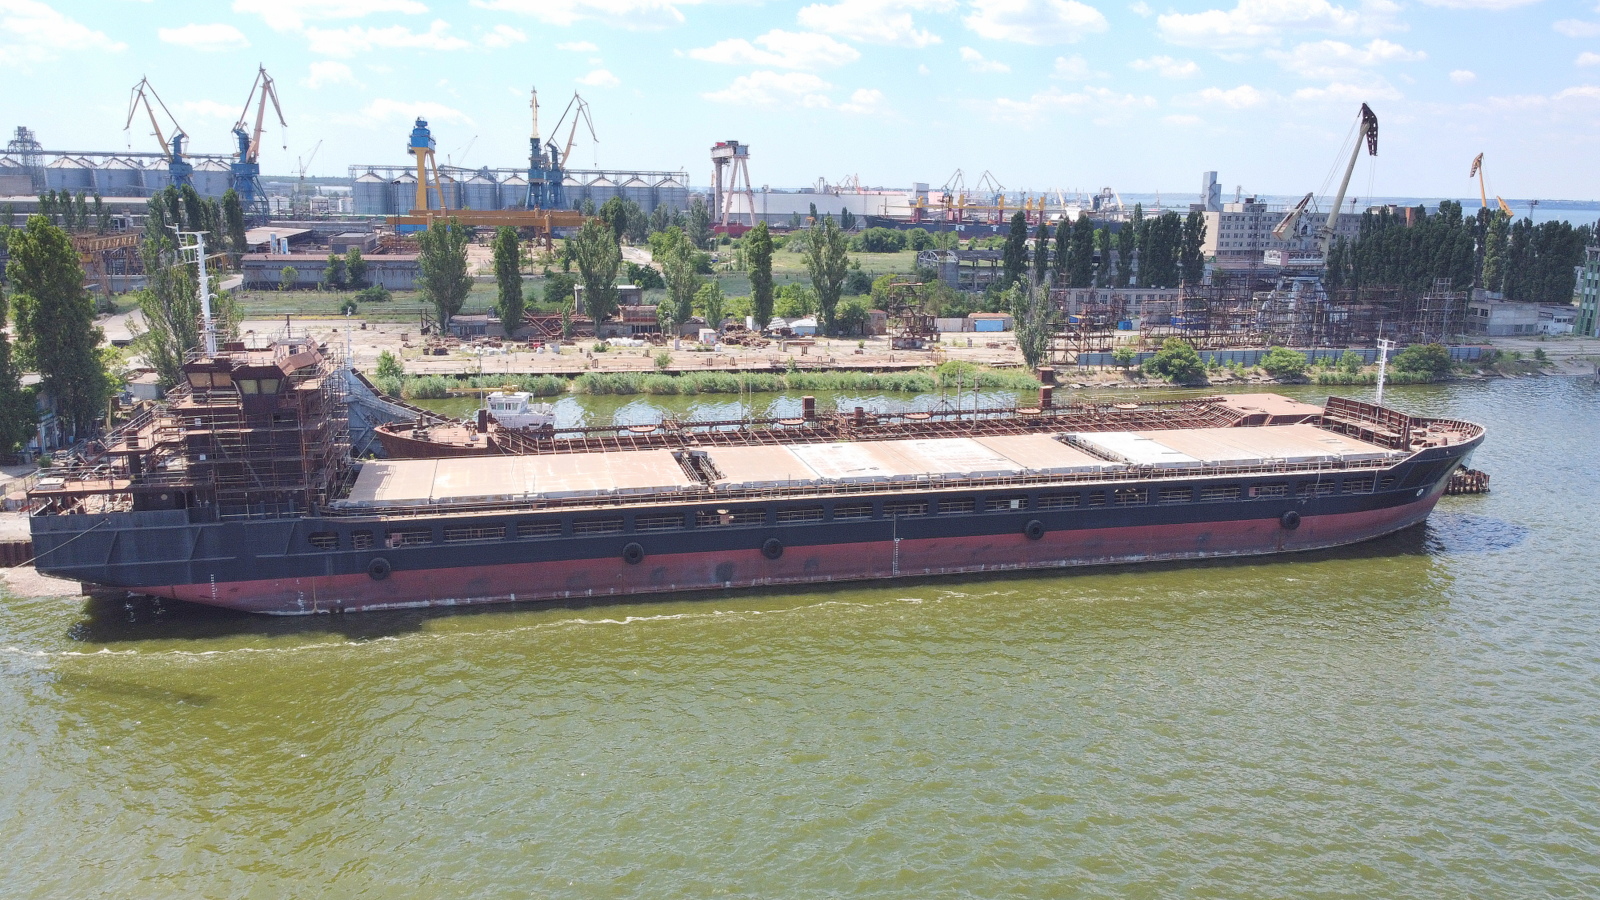 Shipyard Ocean complete the construction of dry cargo vessel, “Bug” type